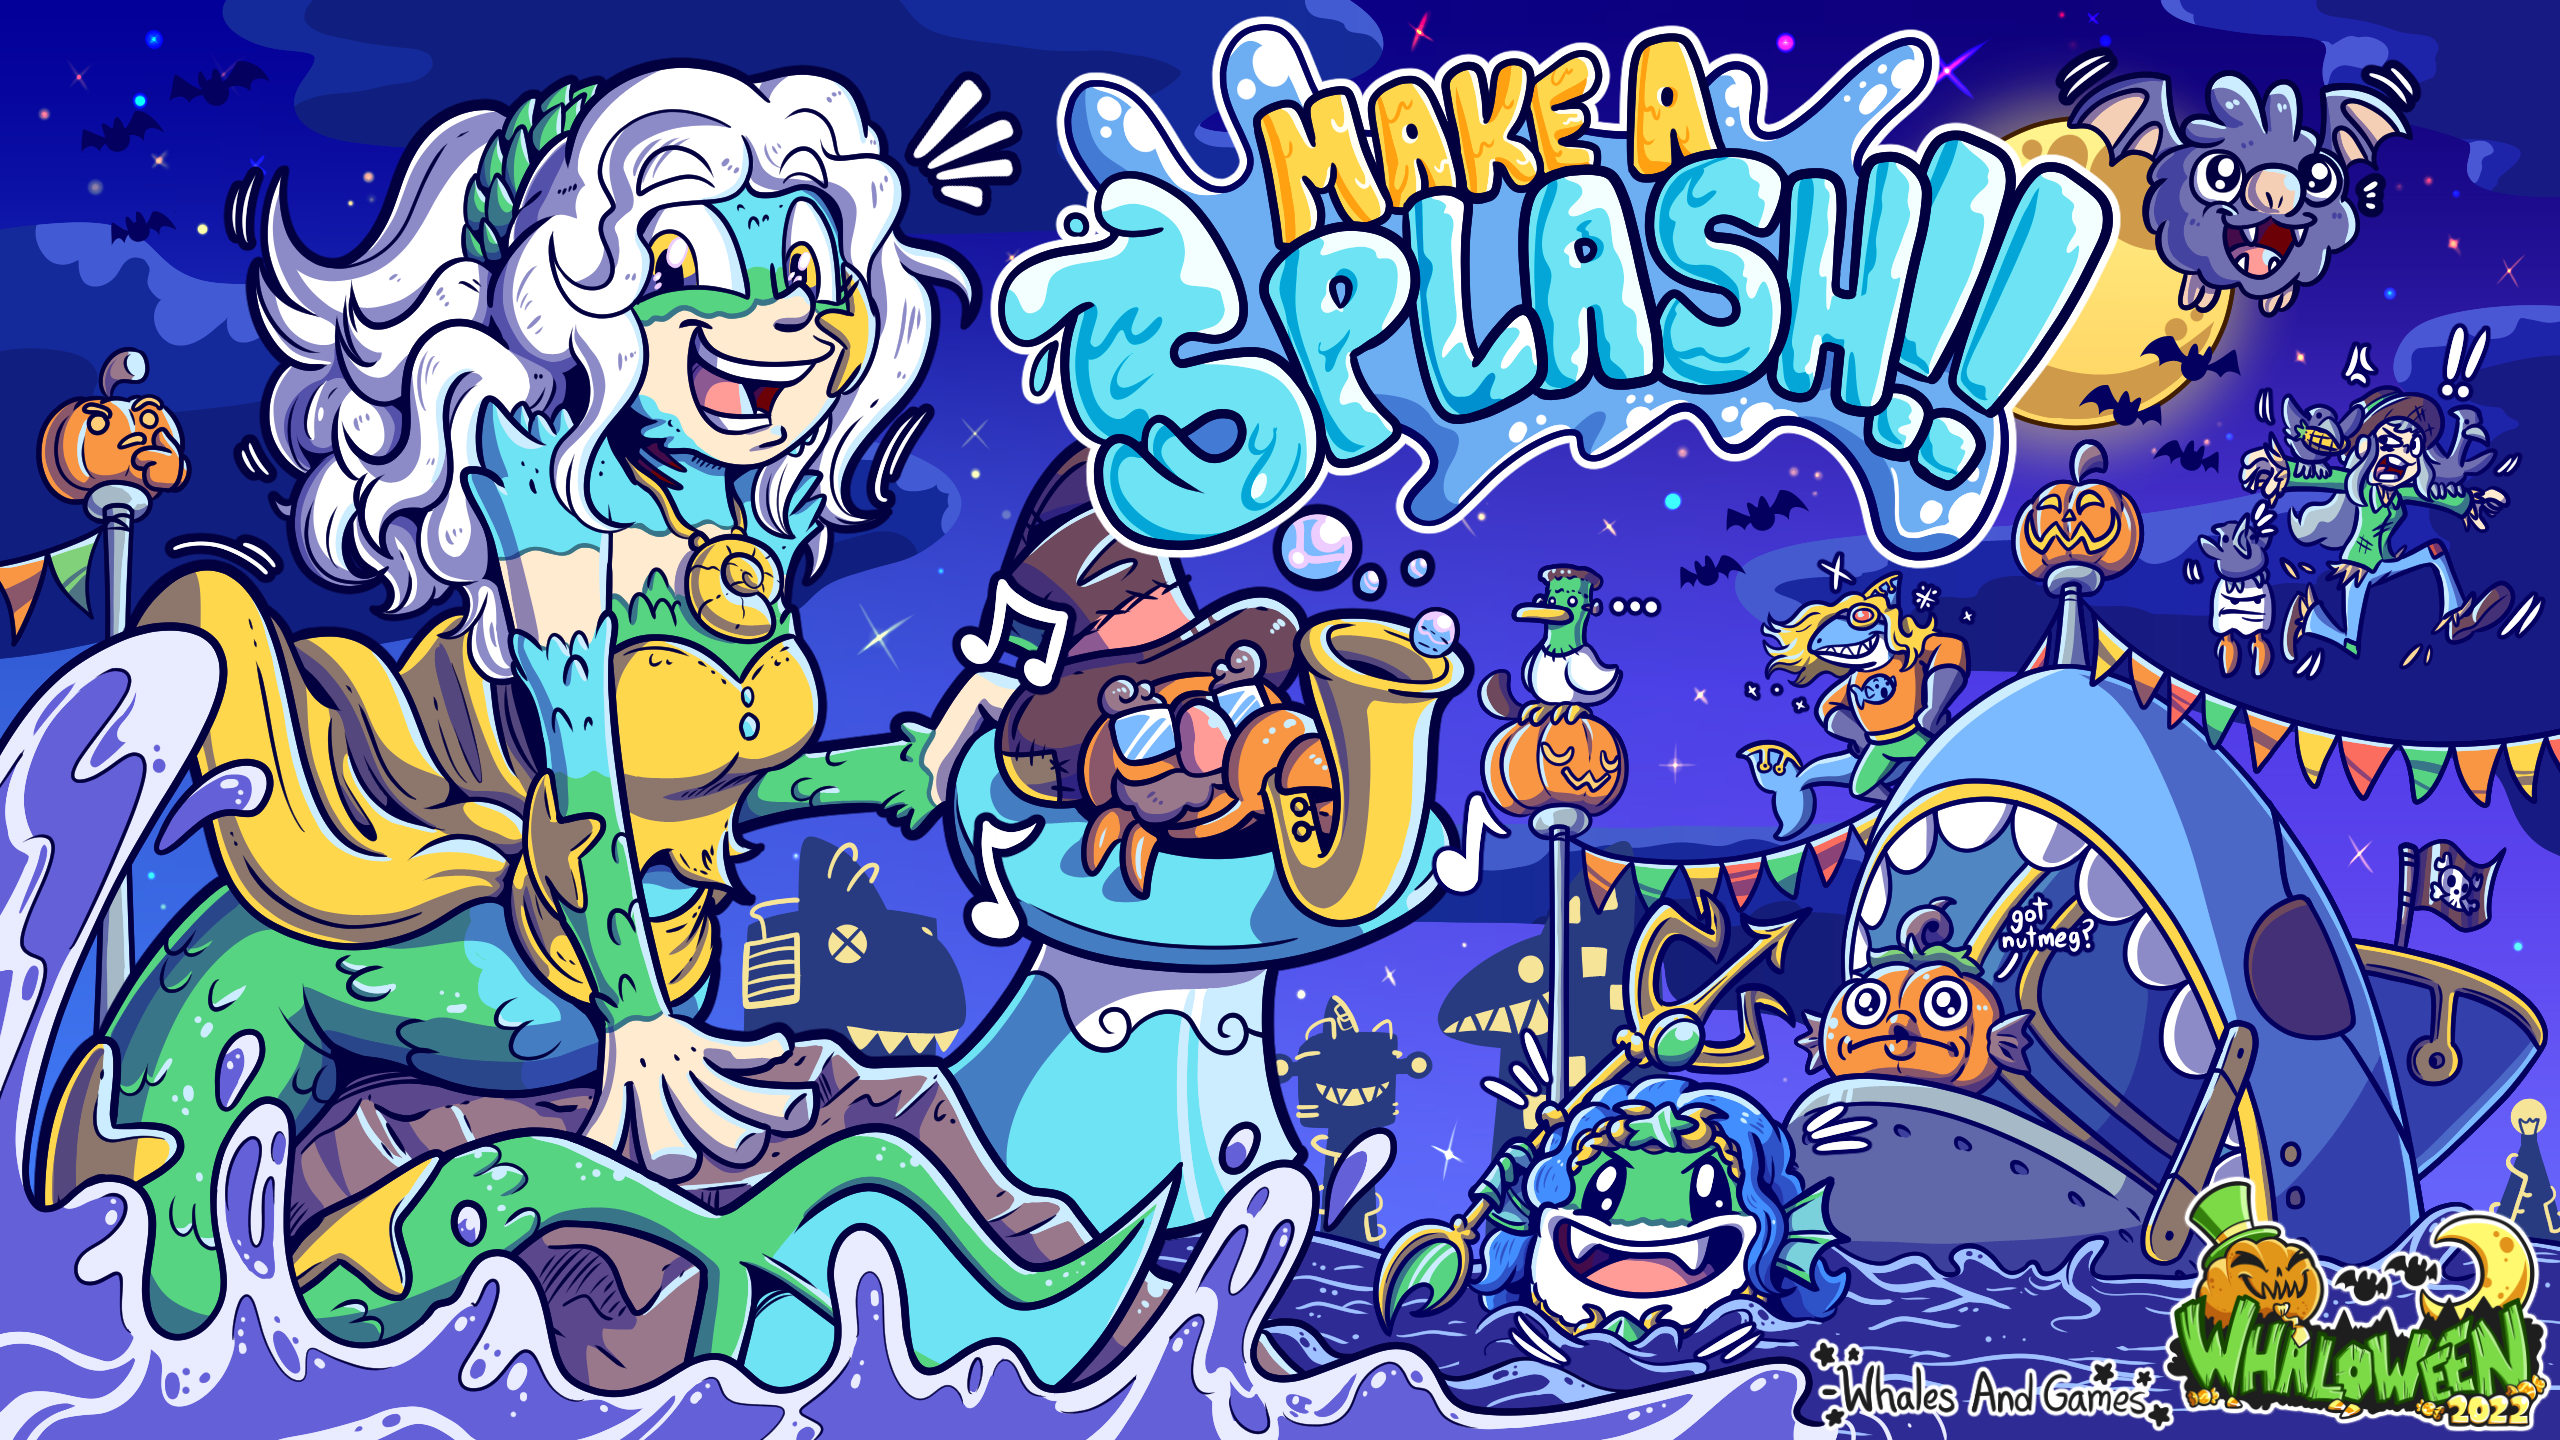 Main key-art for Whales And Games Halloween and Whaloween celebrations for 2022. The artwork features Whalechan, our mascot, transformed into a mermaid at night, with longer silver hair, gills, and several pieces of her skin being decorated with green and blue scales. She is holding her top-hat out where her mascot crab is playing a saxophone while wearing funny glasses. She is sitting next to a rock in the middle of the ocean, right to the Townseek town of Sharkdwell, which has had its lights decorated with various pumpkins and colourful banners. Next to the town, Polite Whale, our studio’s mascot is dressed-up as a triton, holding a trident and a menacing smile. In the background, a round bat can be seen, as well as Dapperchan, another Whales And Games character, dressed as a scarecrow being carried away by crows. The artwork has a big splash at the top reading “Make a splash!” rounding out this year’s theming.